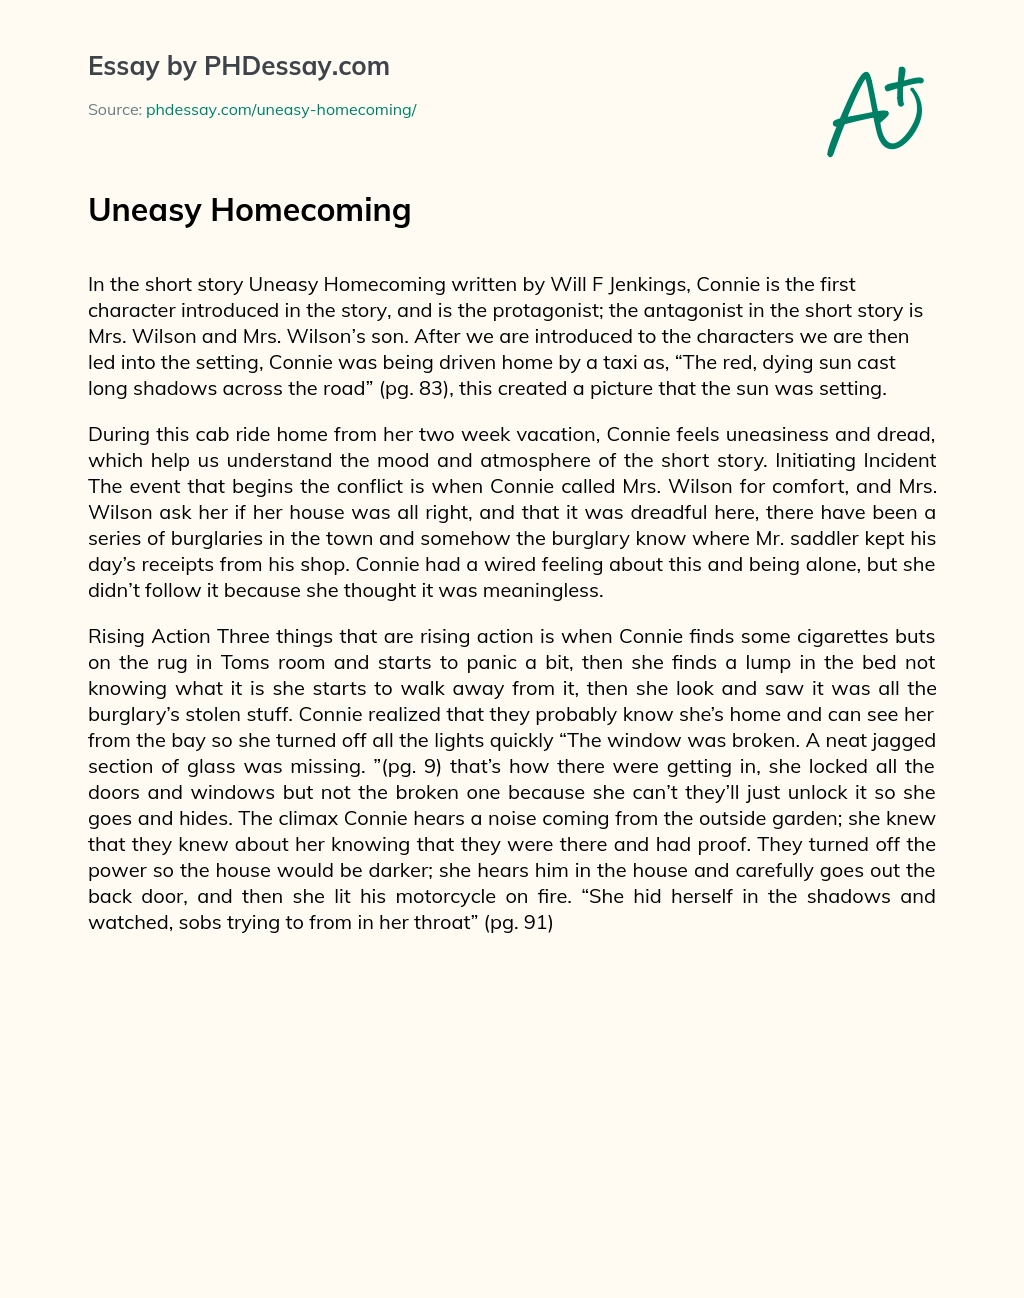 Uneasy Homecoming essay